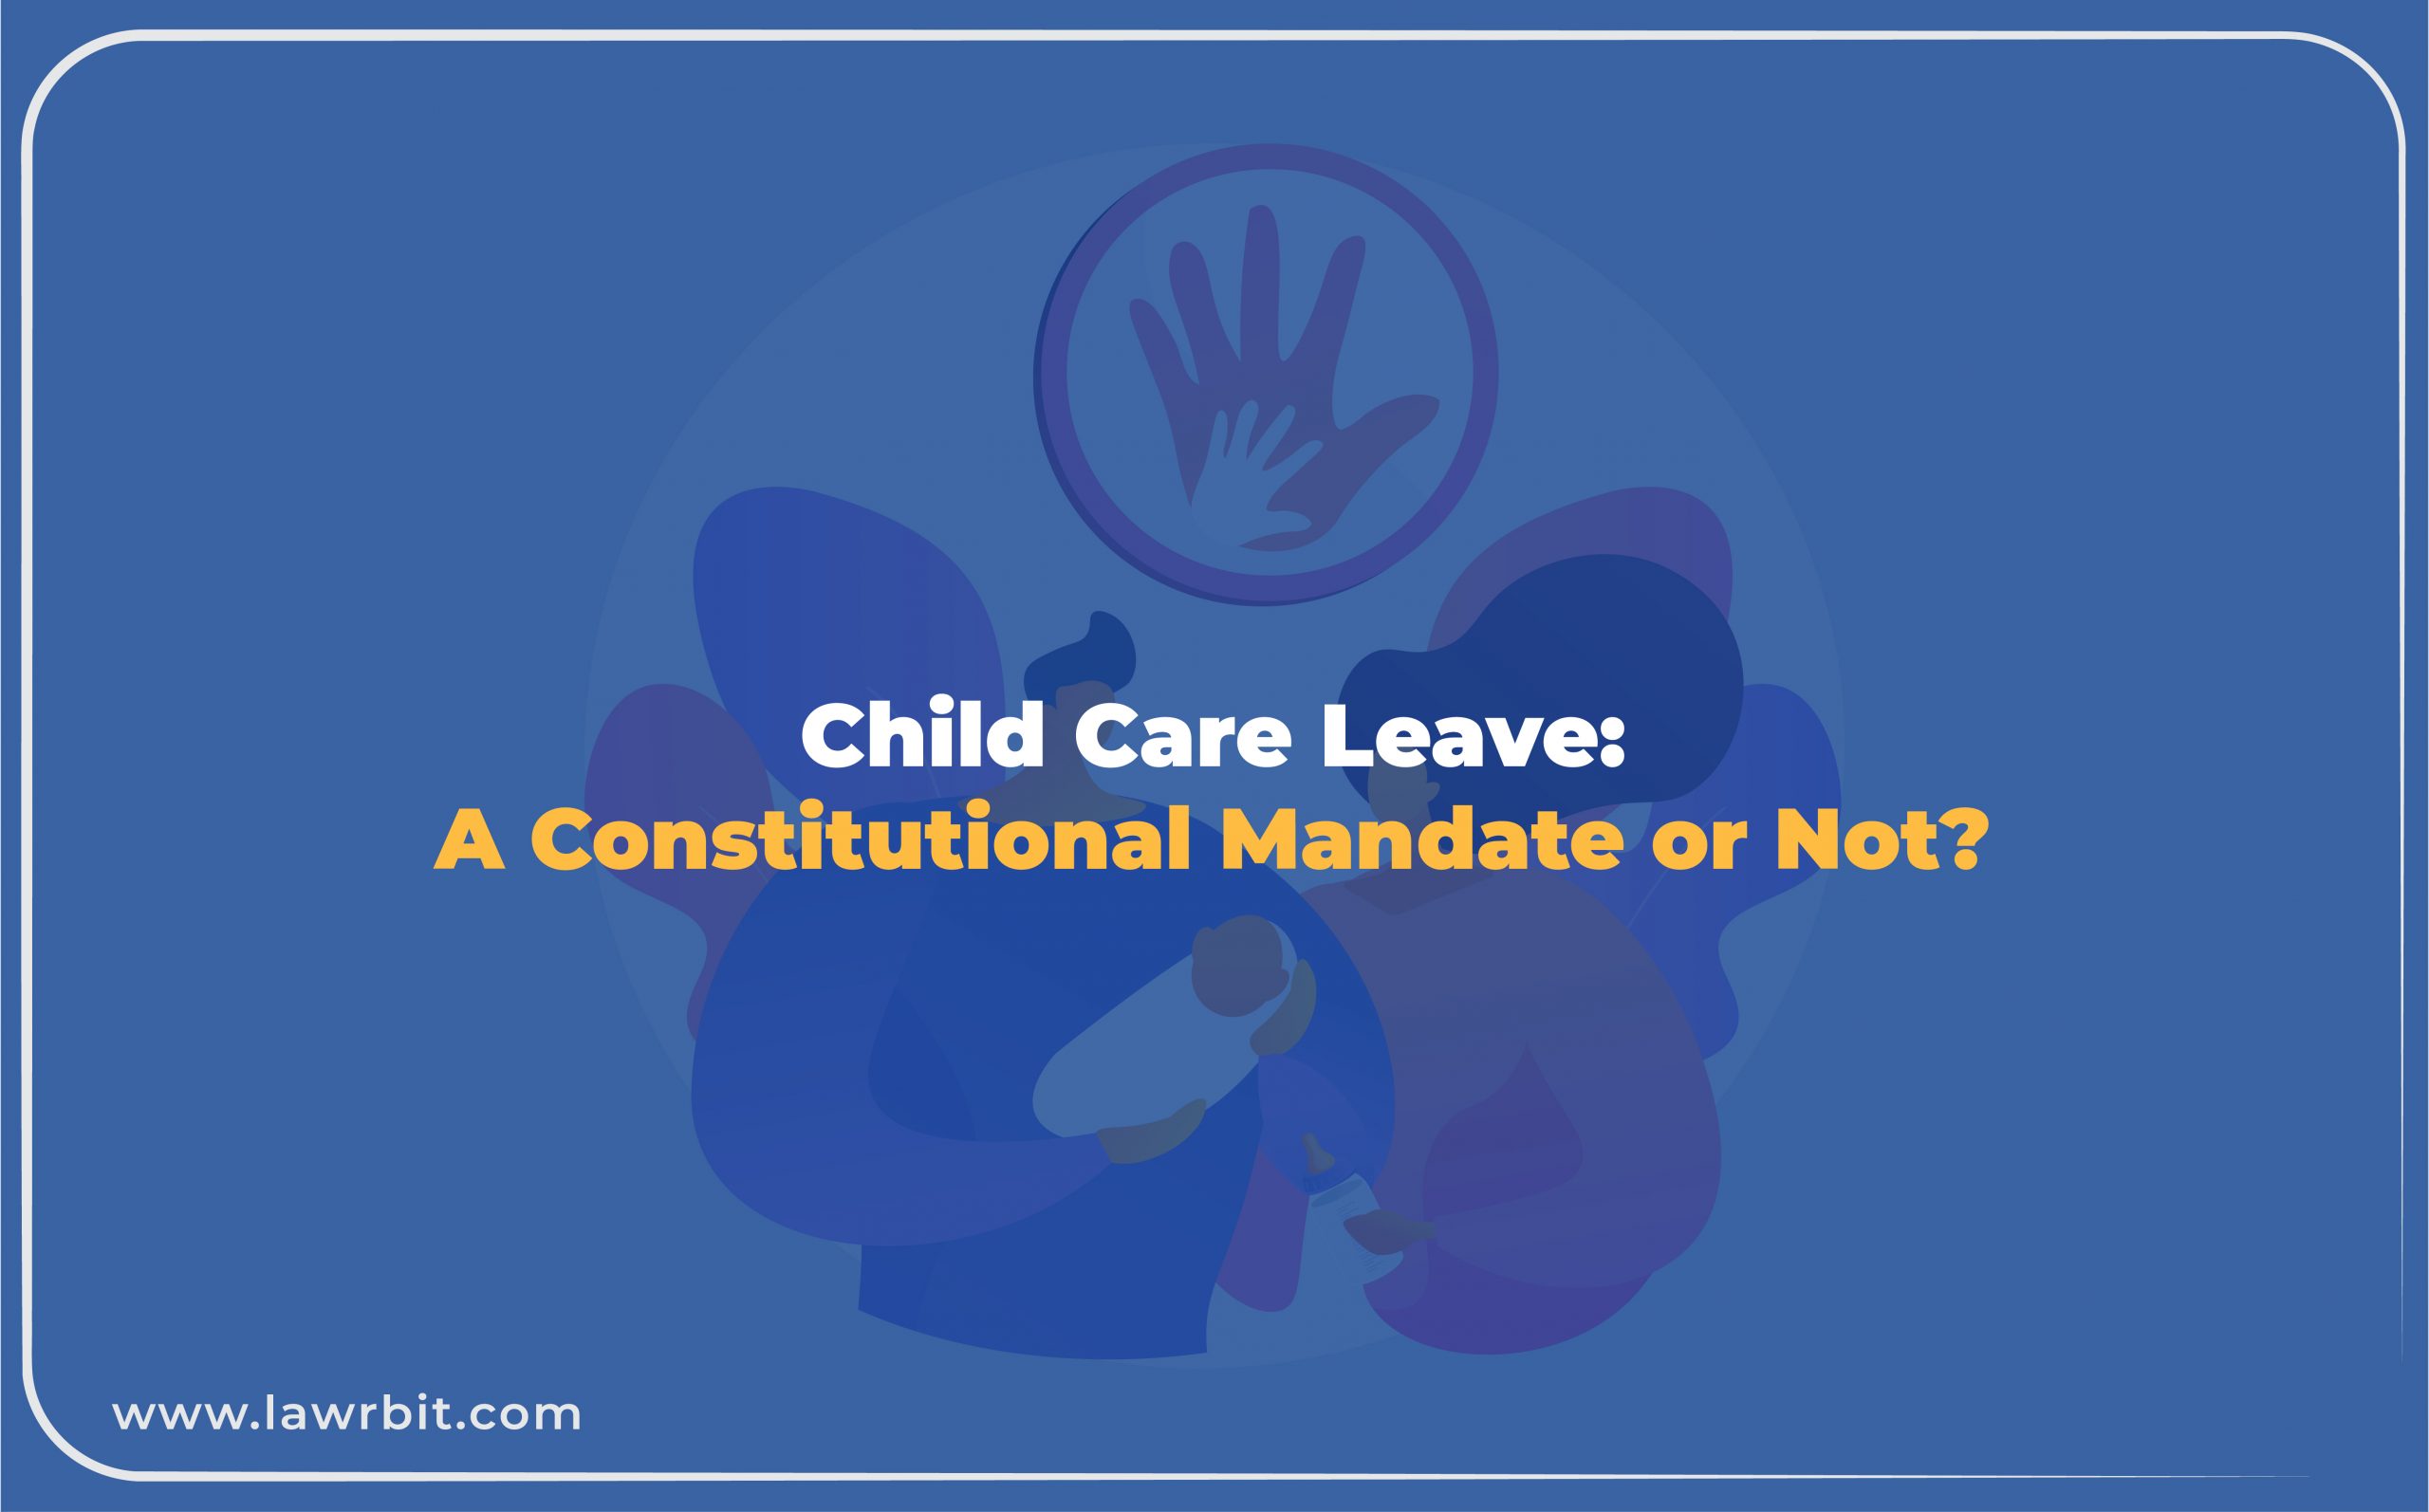 Child Care Leave: A Constitutional Mandate or Not?